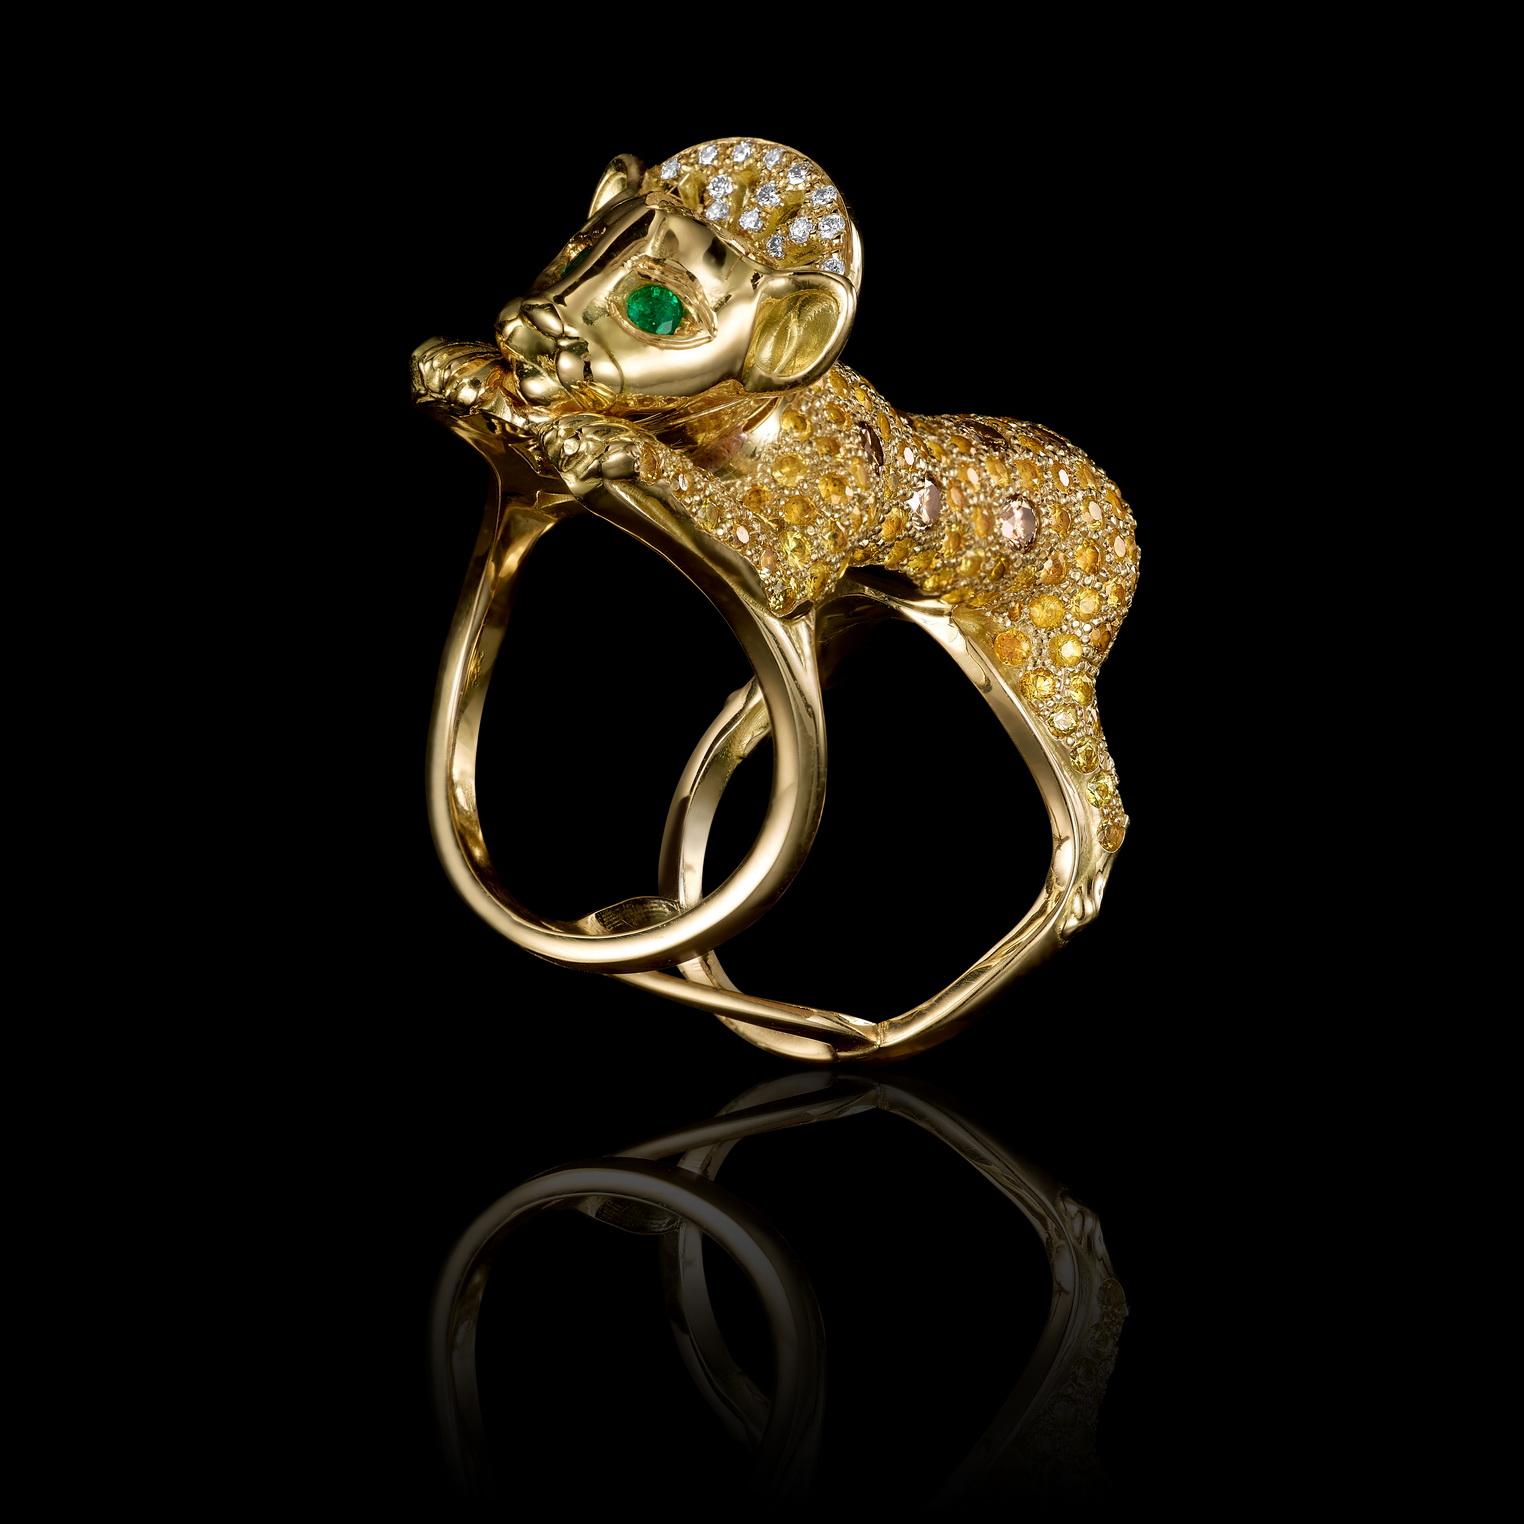 Lion Cub ring in 18K gold, cognac and clear diamonds pave and emerald eyes. 

This ring depicts a young cub in a state of play – holding on to the wearer’s finger and at the same time reaching toward something that caught its interest. Its soft